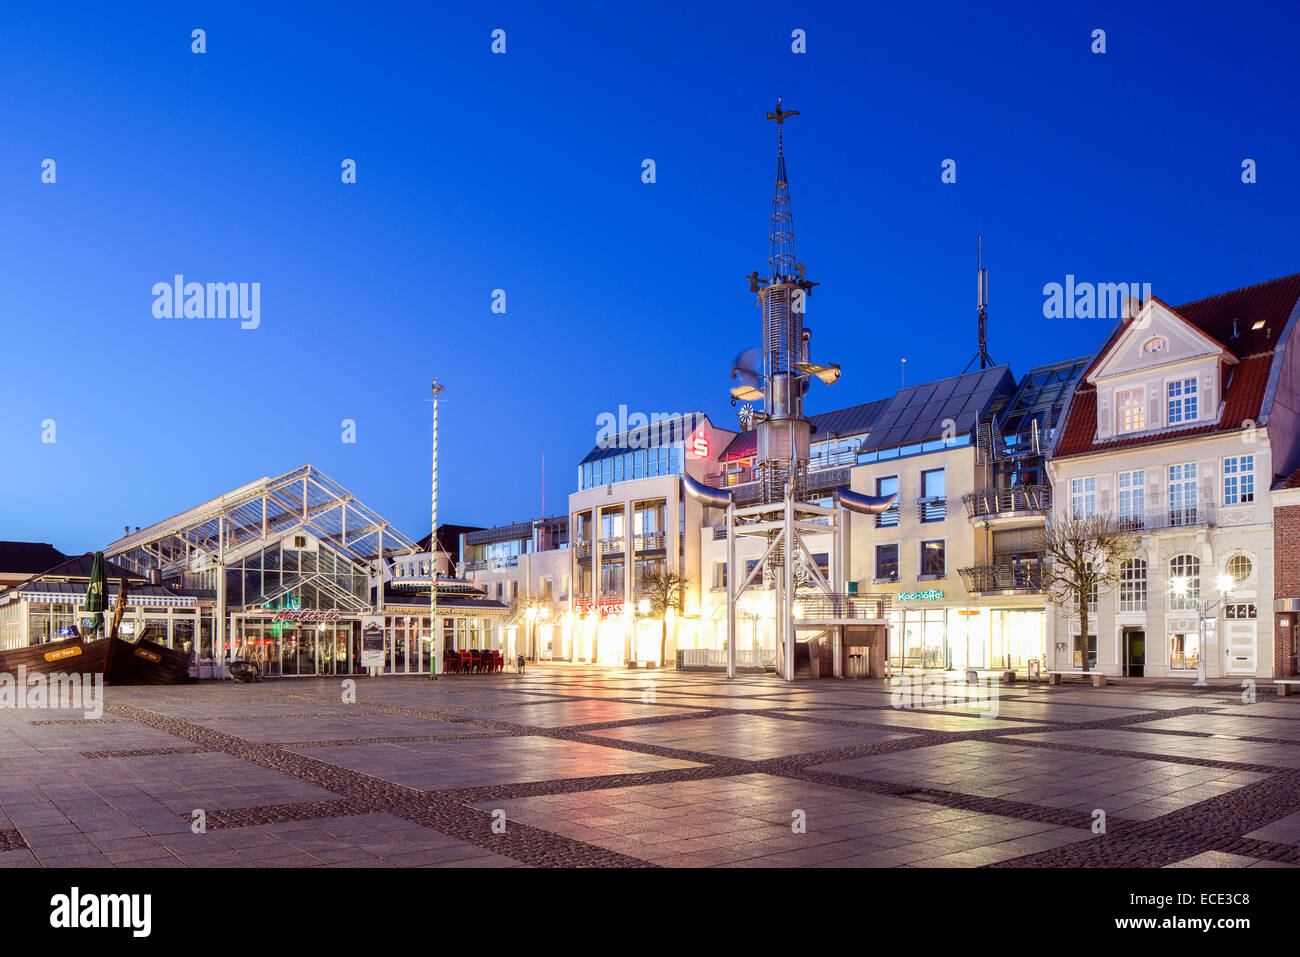 Aurich market square with the market hall and the Sous Tower artwork, Aurich, East Frisia, Lower Saxony, Germany Stock Photo